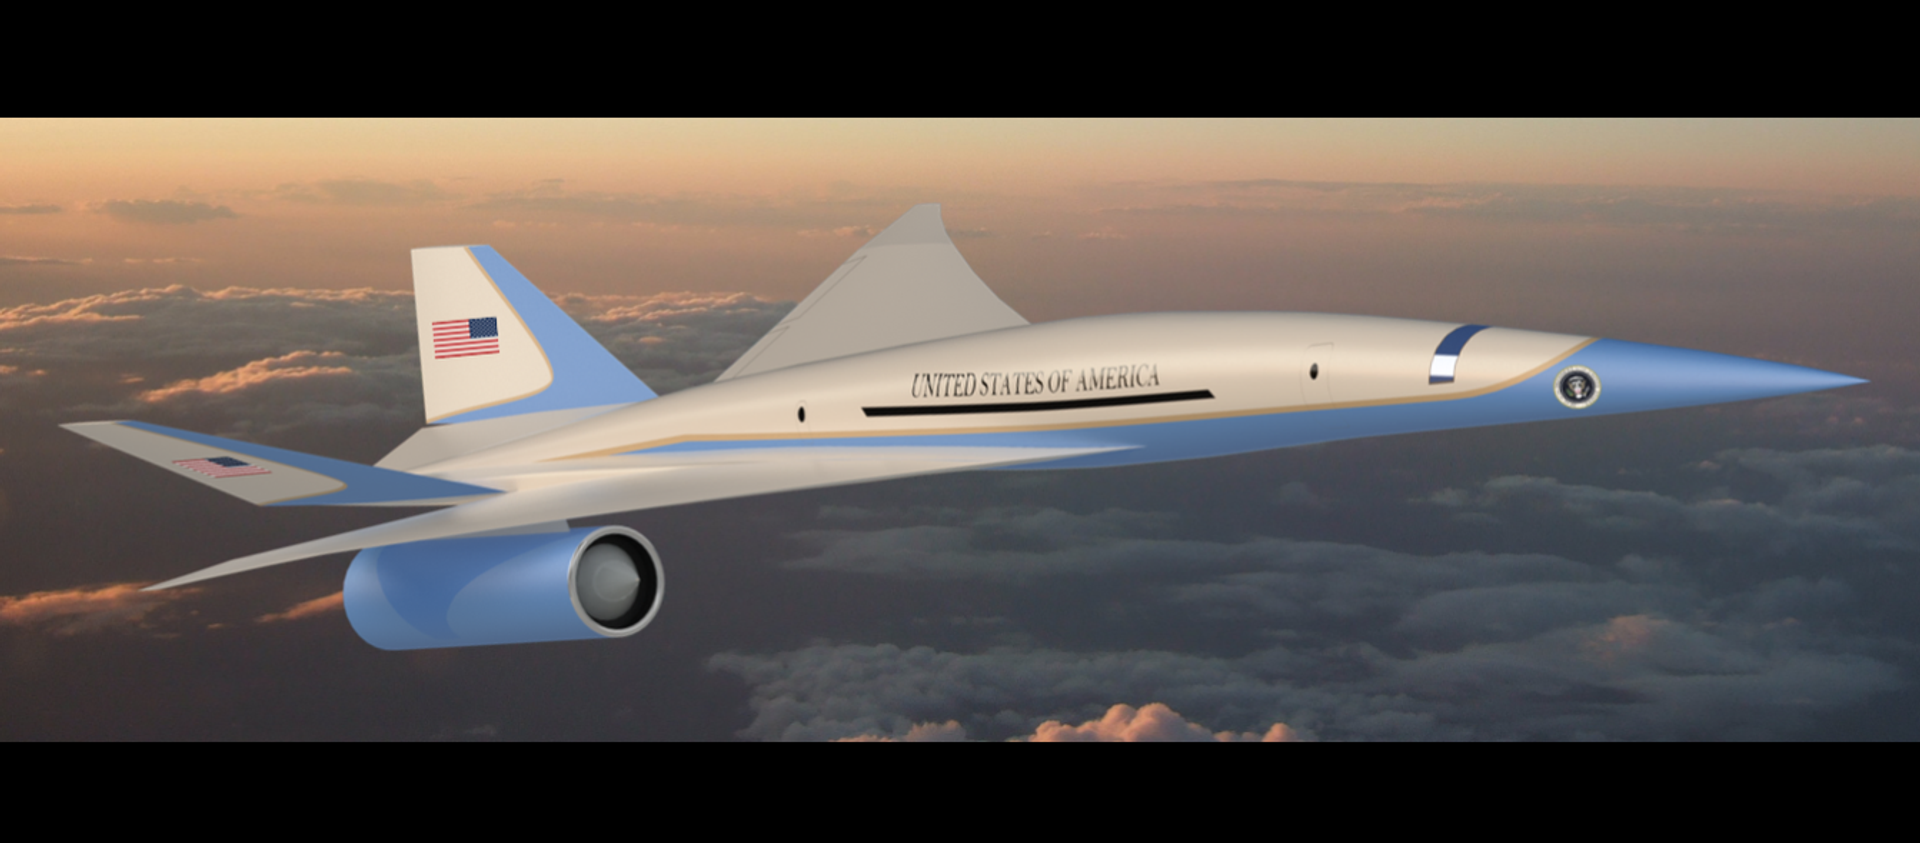 Artist concept of Exosonic’s low boom supersonic airliner converted into an executive transport aircraft (Air Force One). Note: the above image does not represent Exosonic’s current configuration for proprietary concerns. - Sputnik International, 1920, 02.09.2020